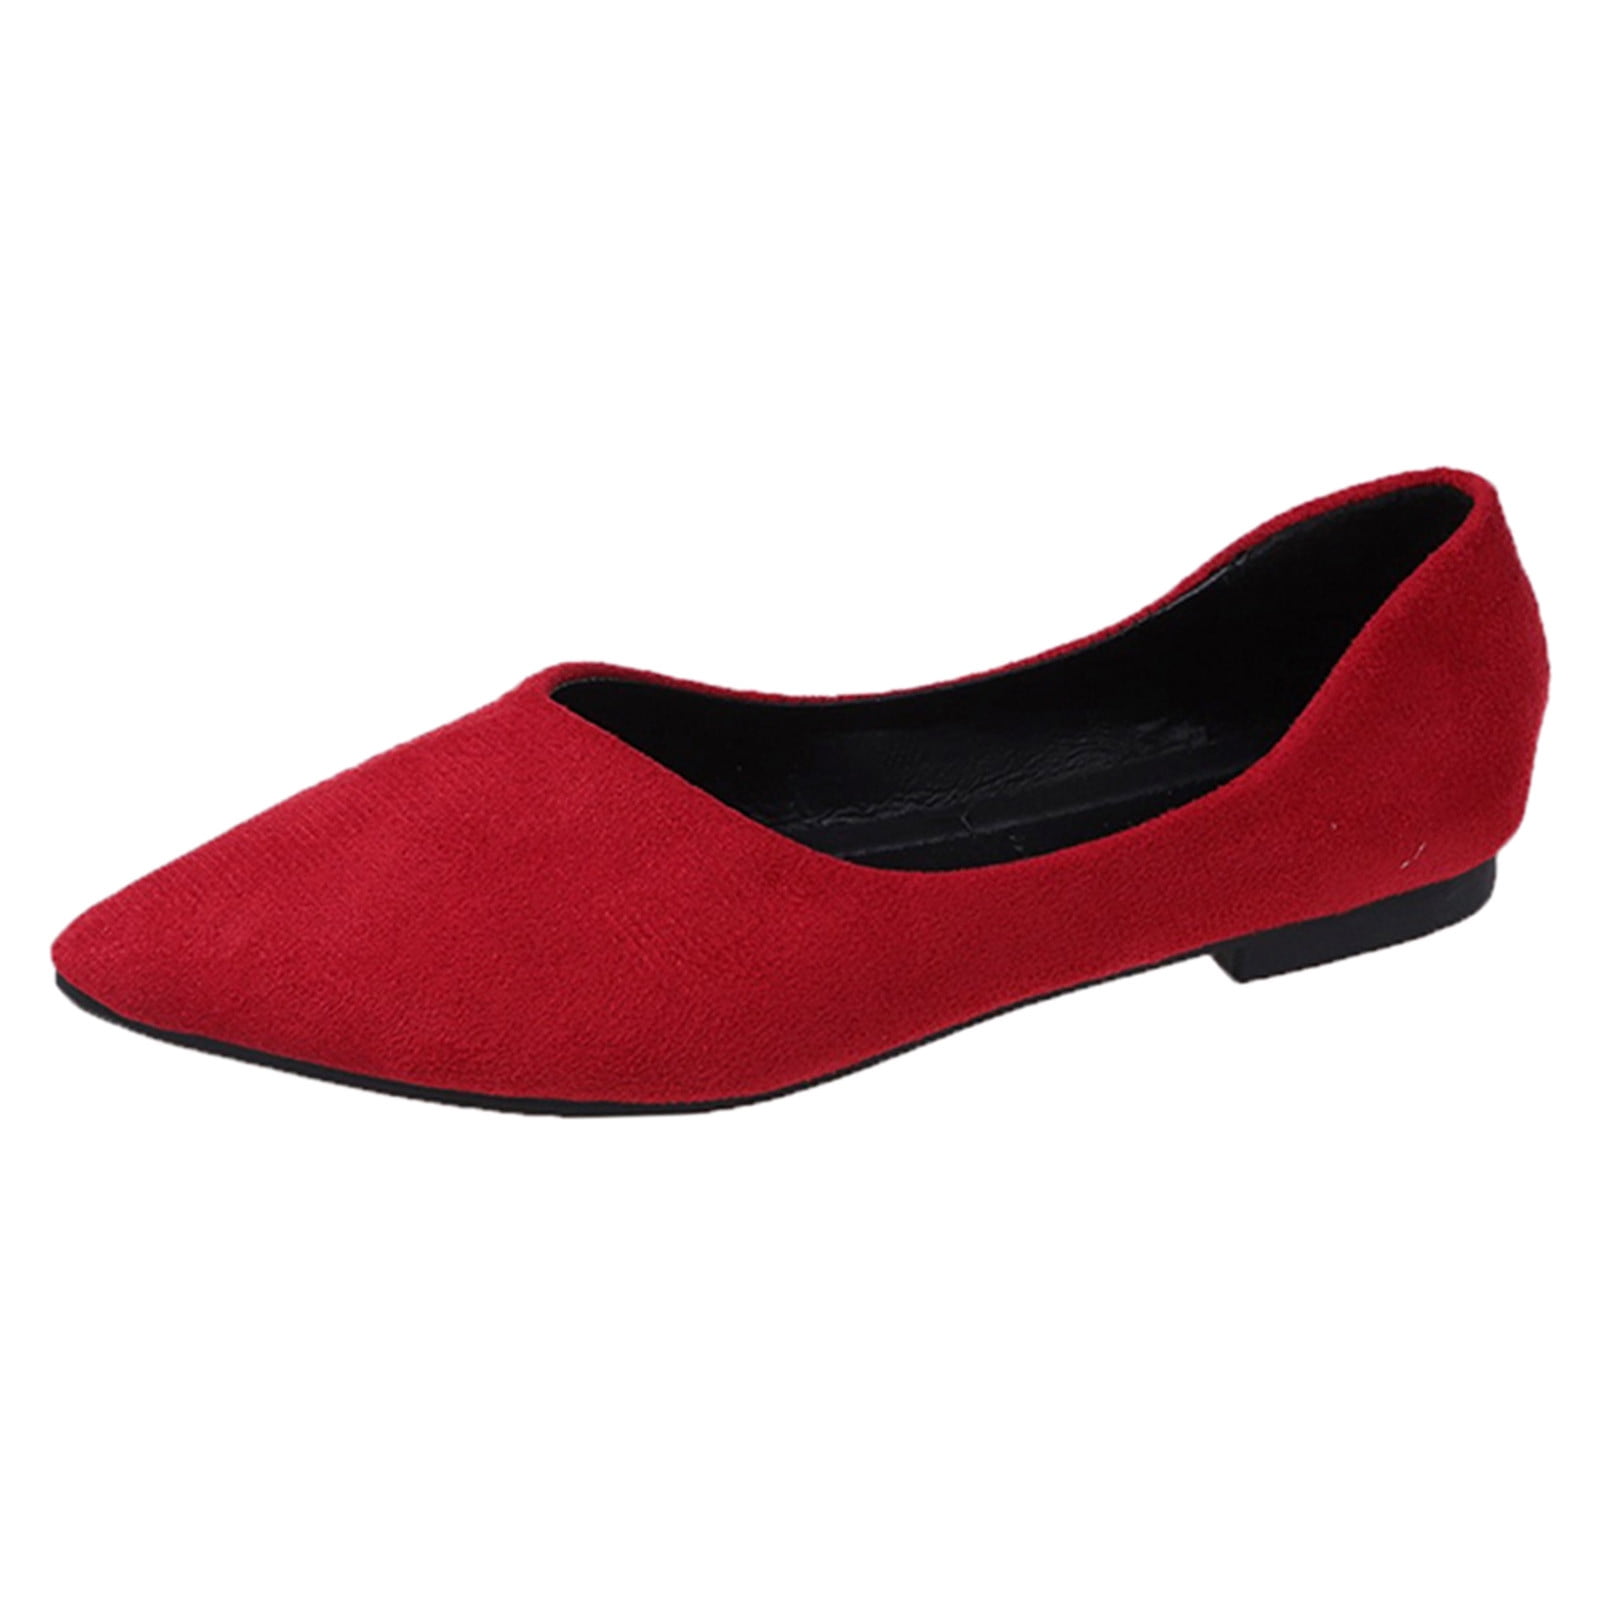 TOWED22 Women's Flats Pointed Flats Shoes Women Breathable Ballet Flats ...